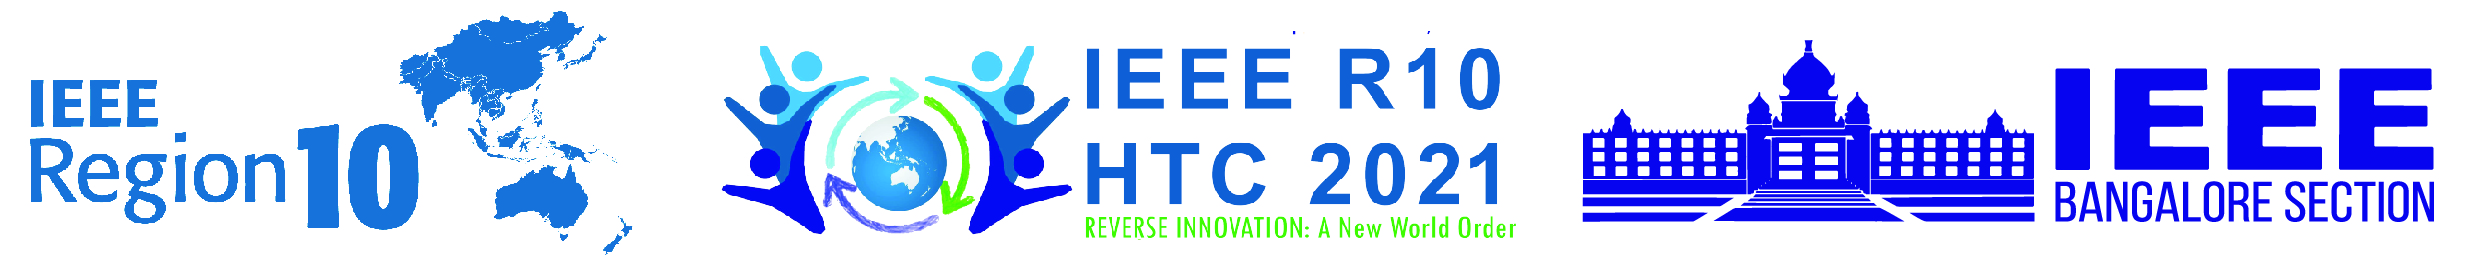 IEEE Region 10 Humanitarian Technology Conference (R10 HTC)